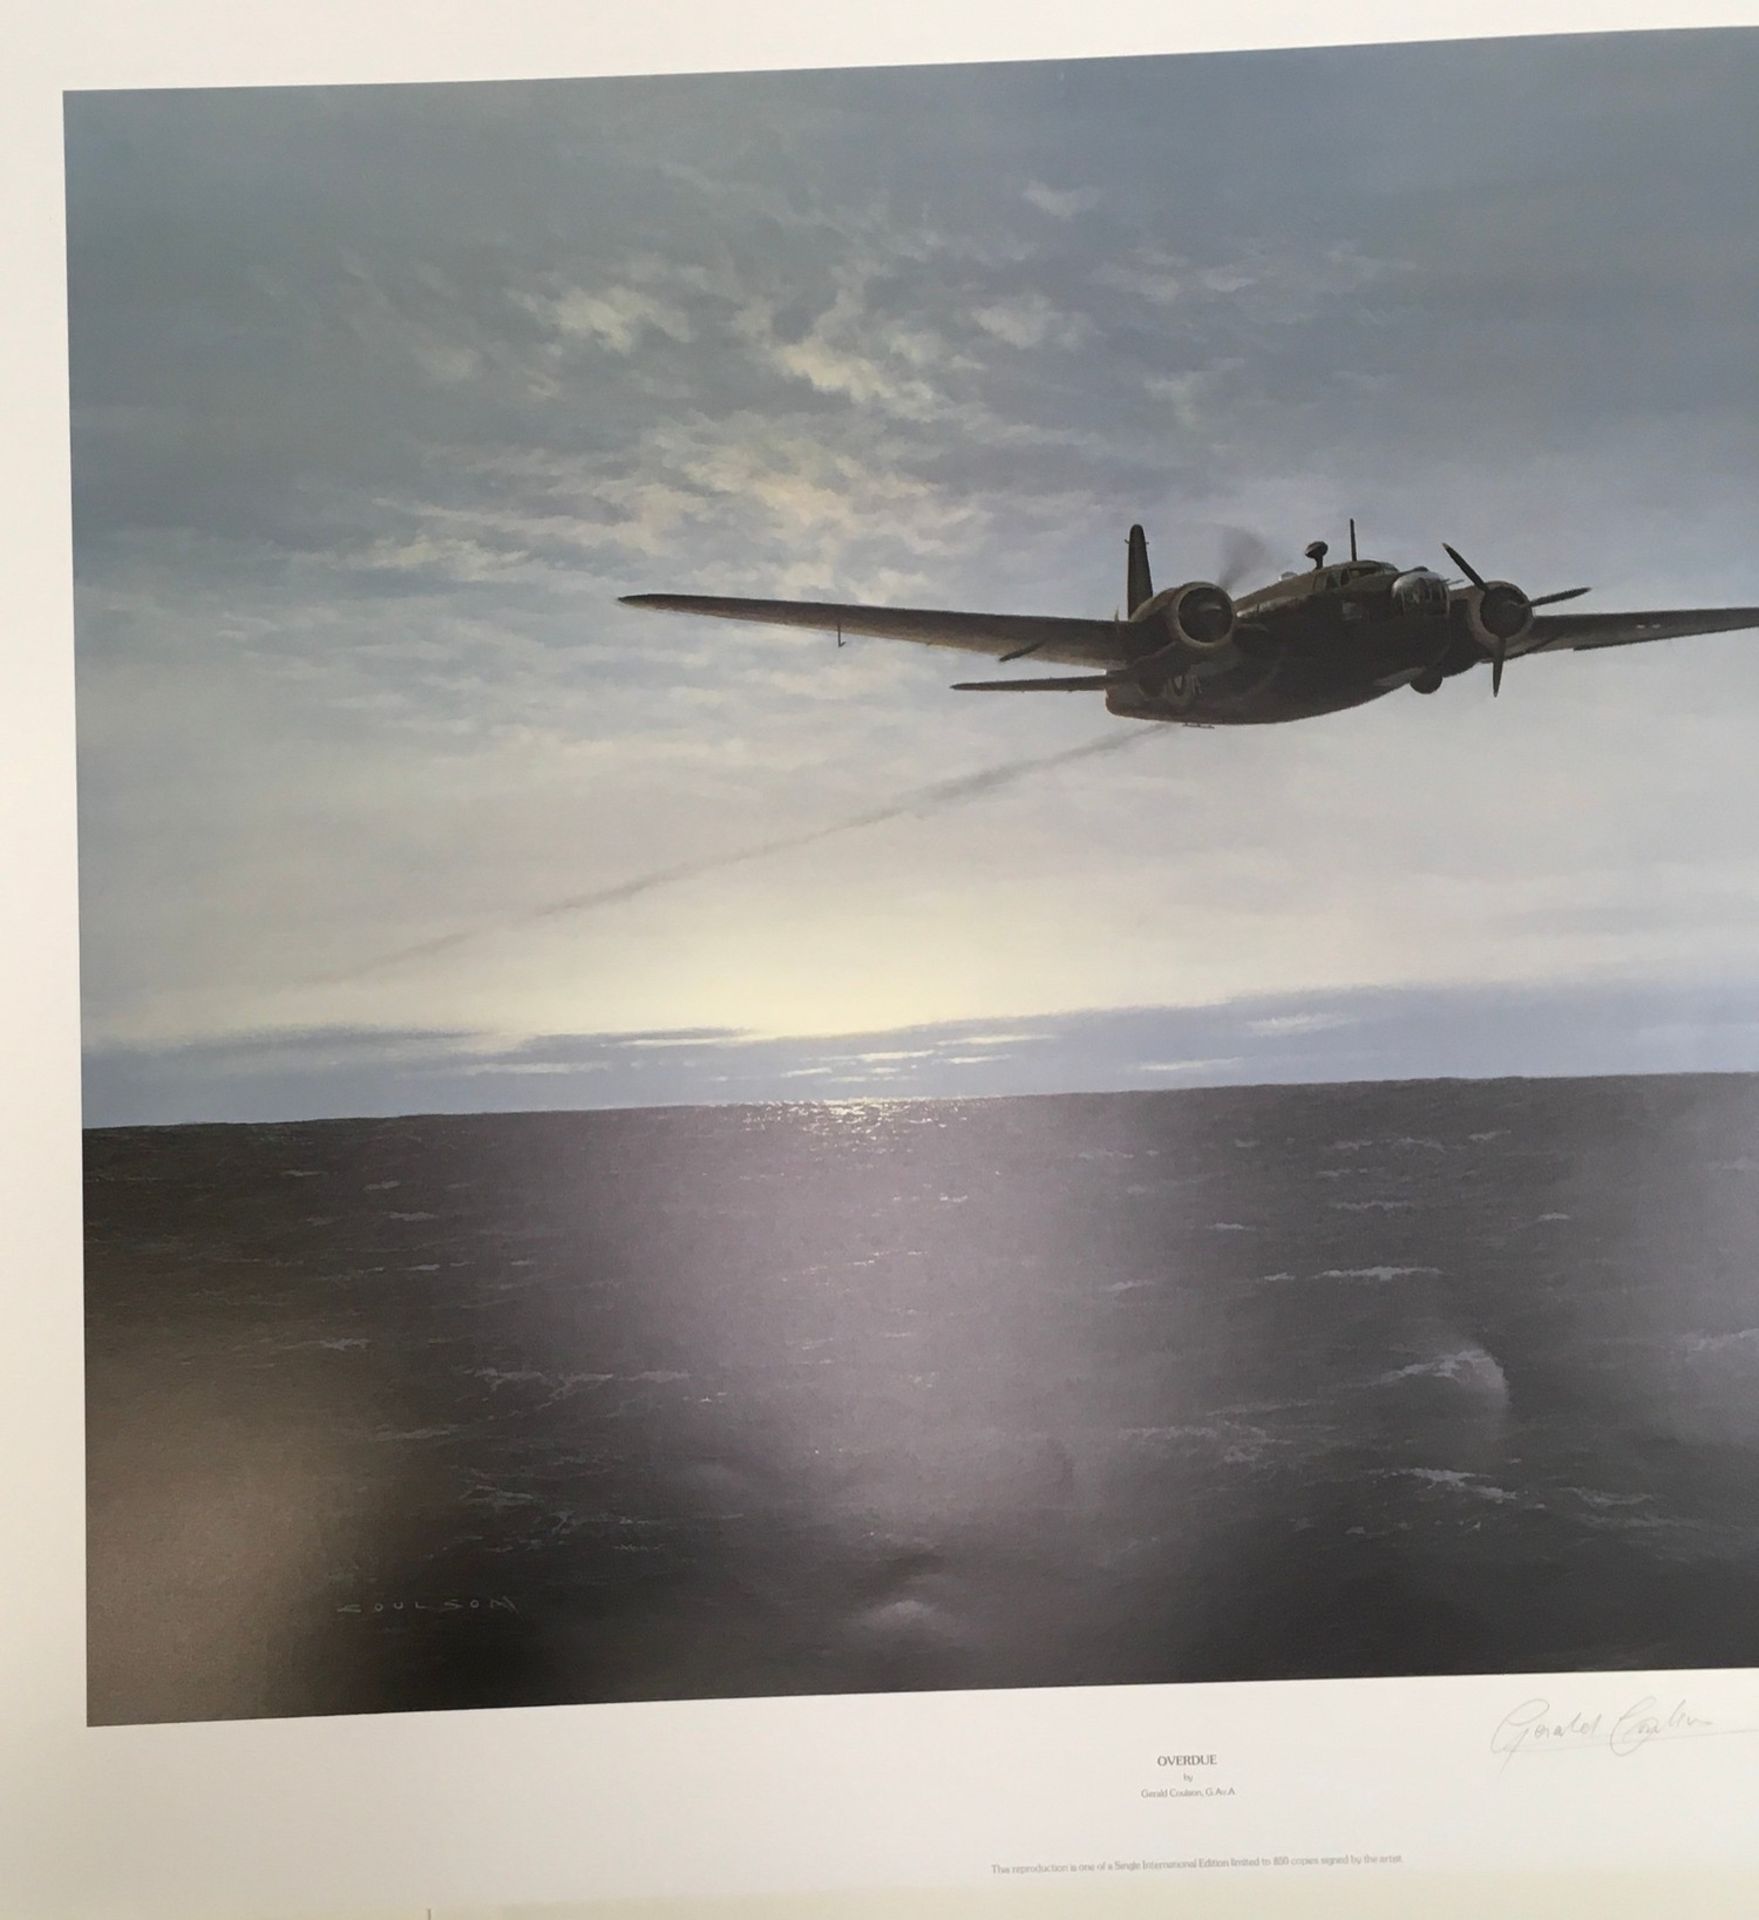 Overdue a ltd edition second WW study of RAF airplane by Gerald Coulson with indentation stamp - Image 5 of 6